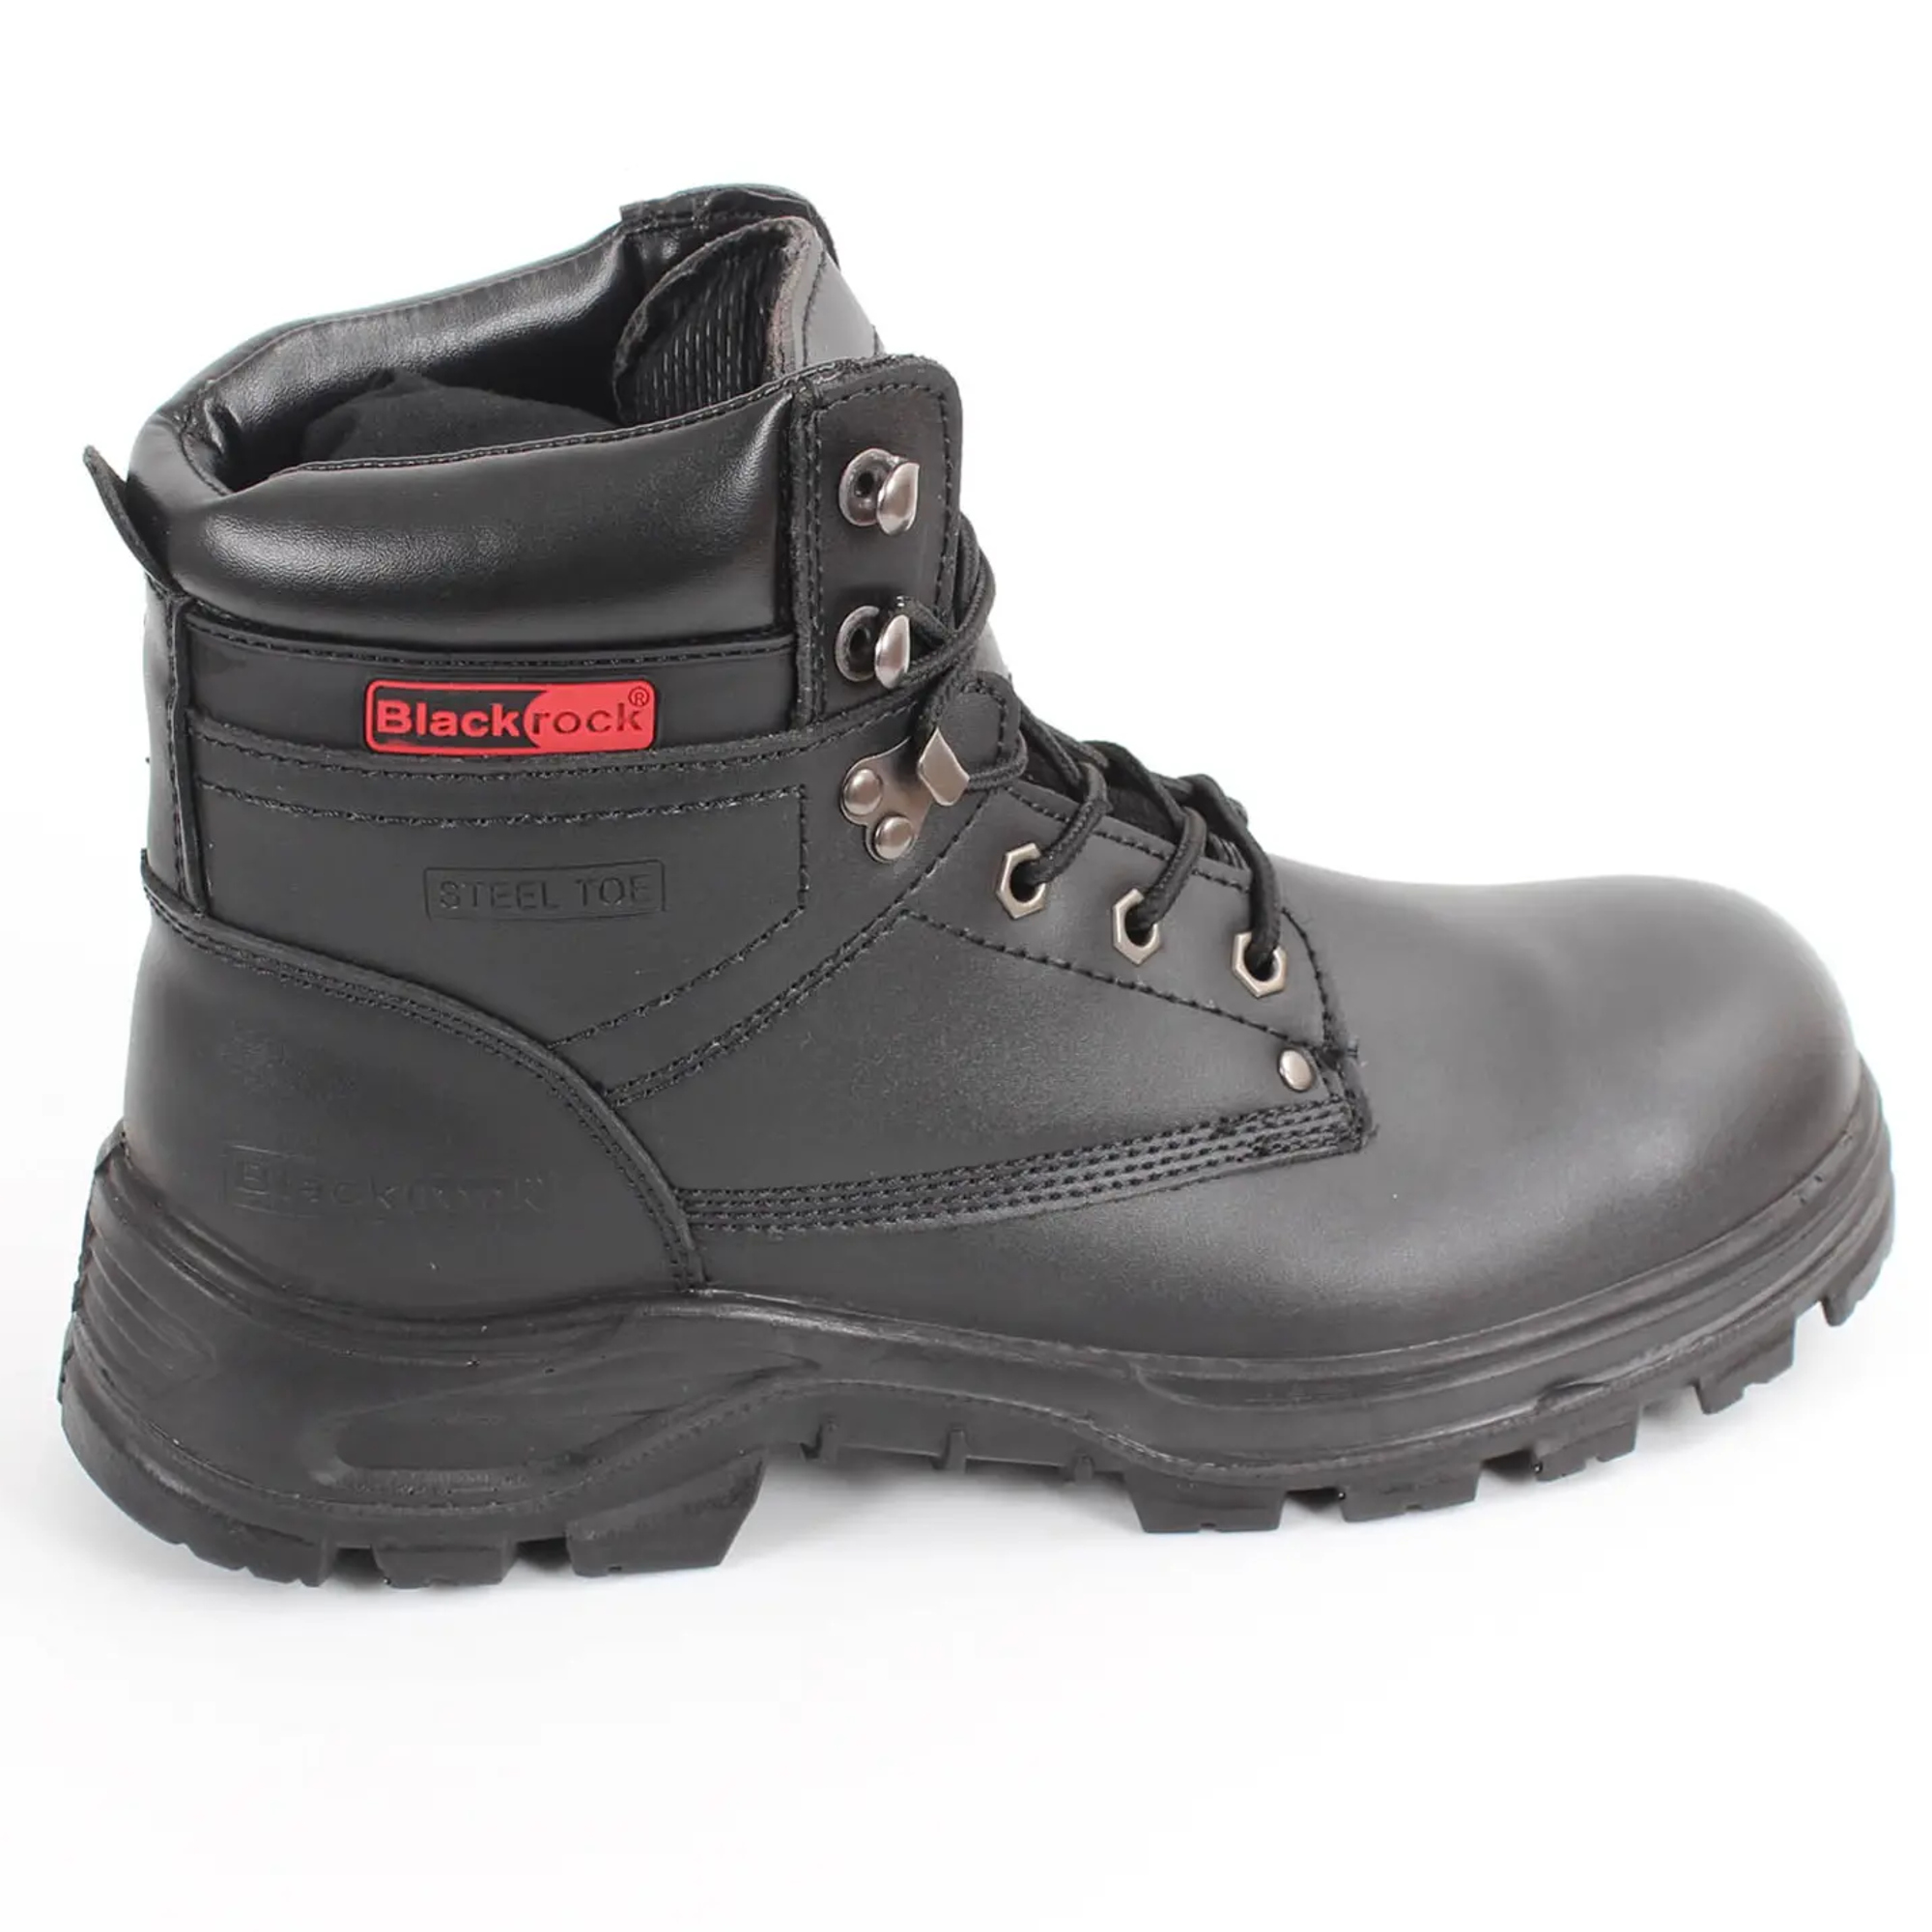 Blackrock Ultimate Work Boots Safety Steel Toe Caps Black Leather SF08 